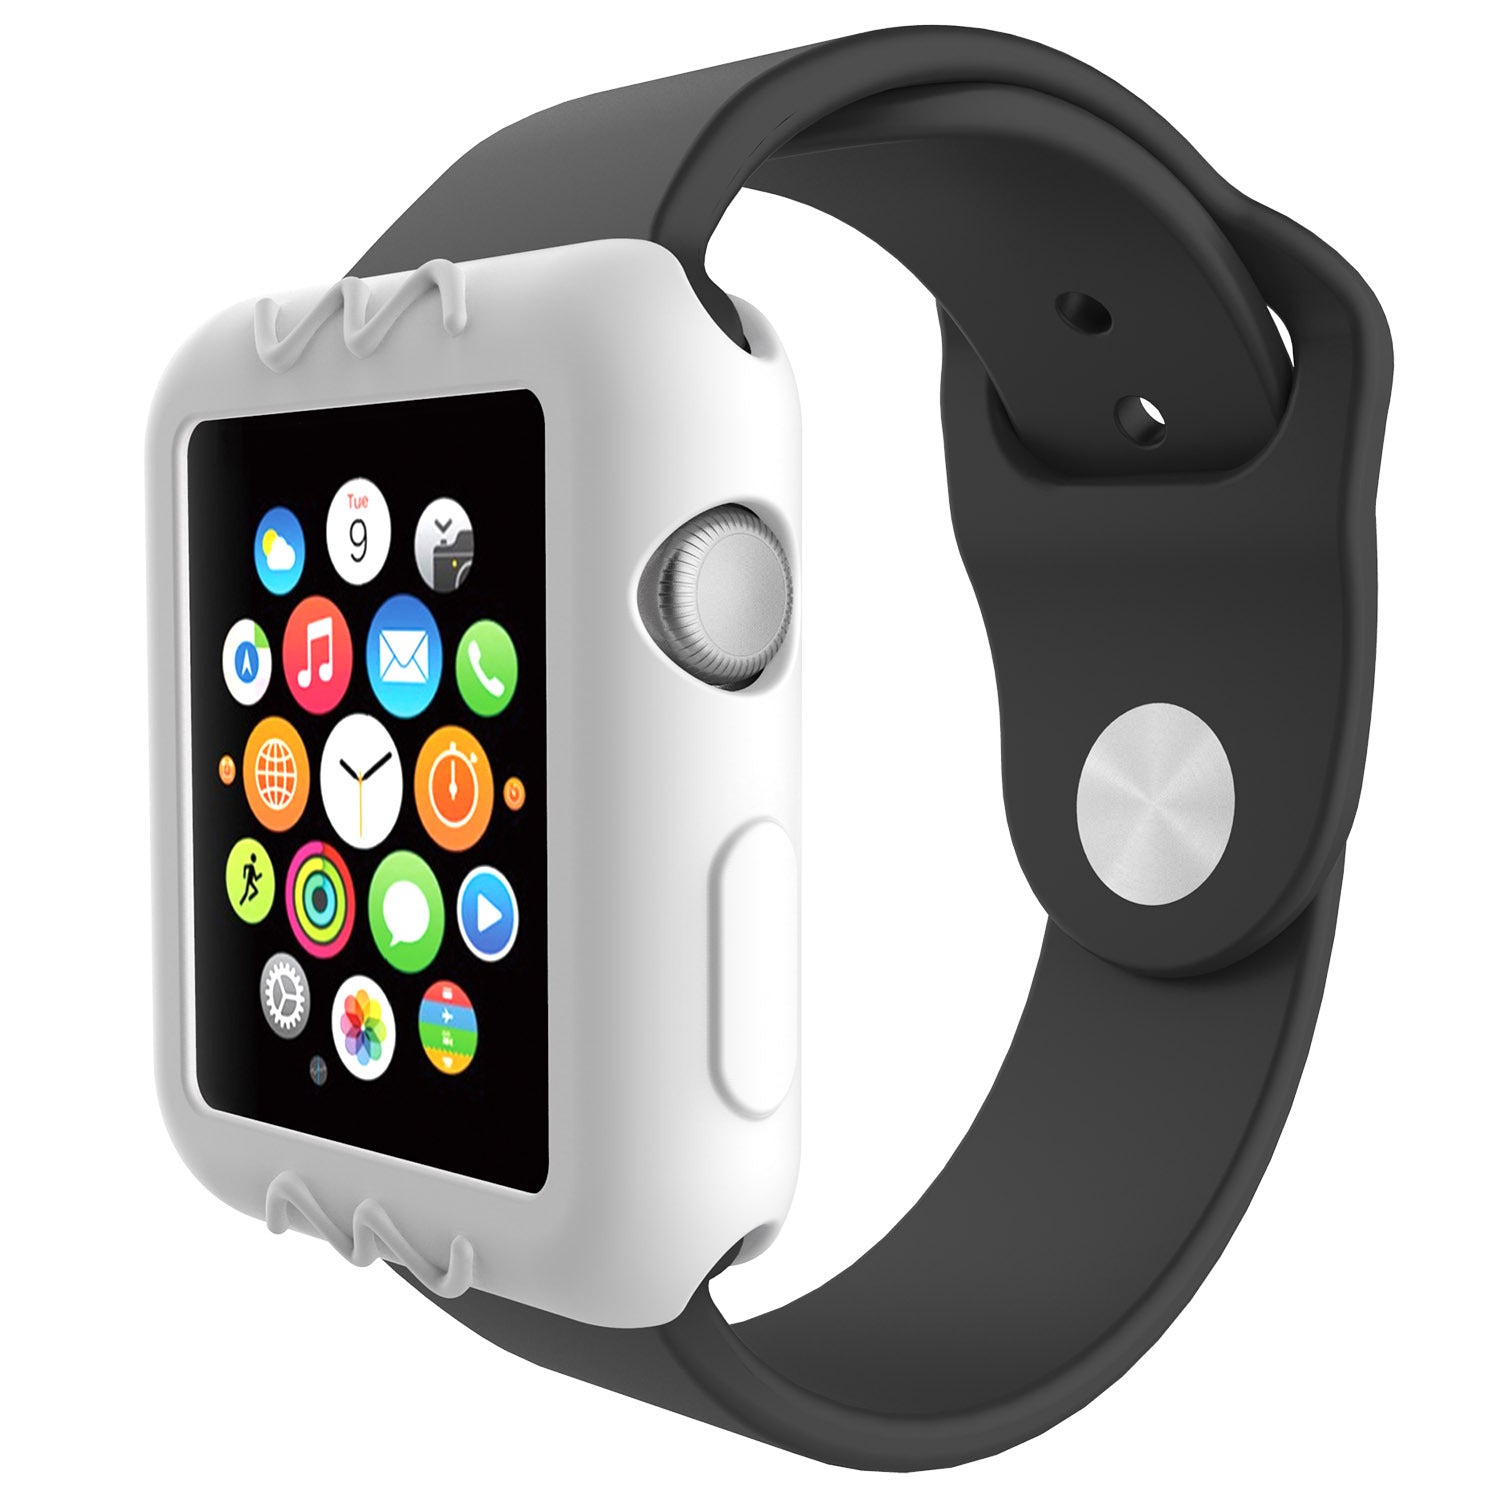 Universal Silicone Scratch Resistant Protective Watch Case For Apple Watch Series 1/2/3 38mm/42mm